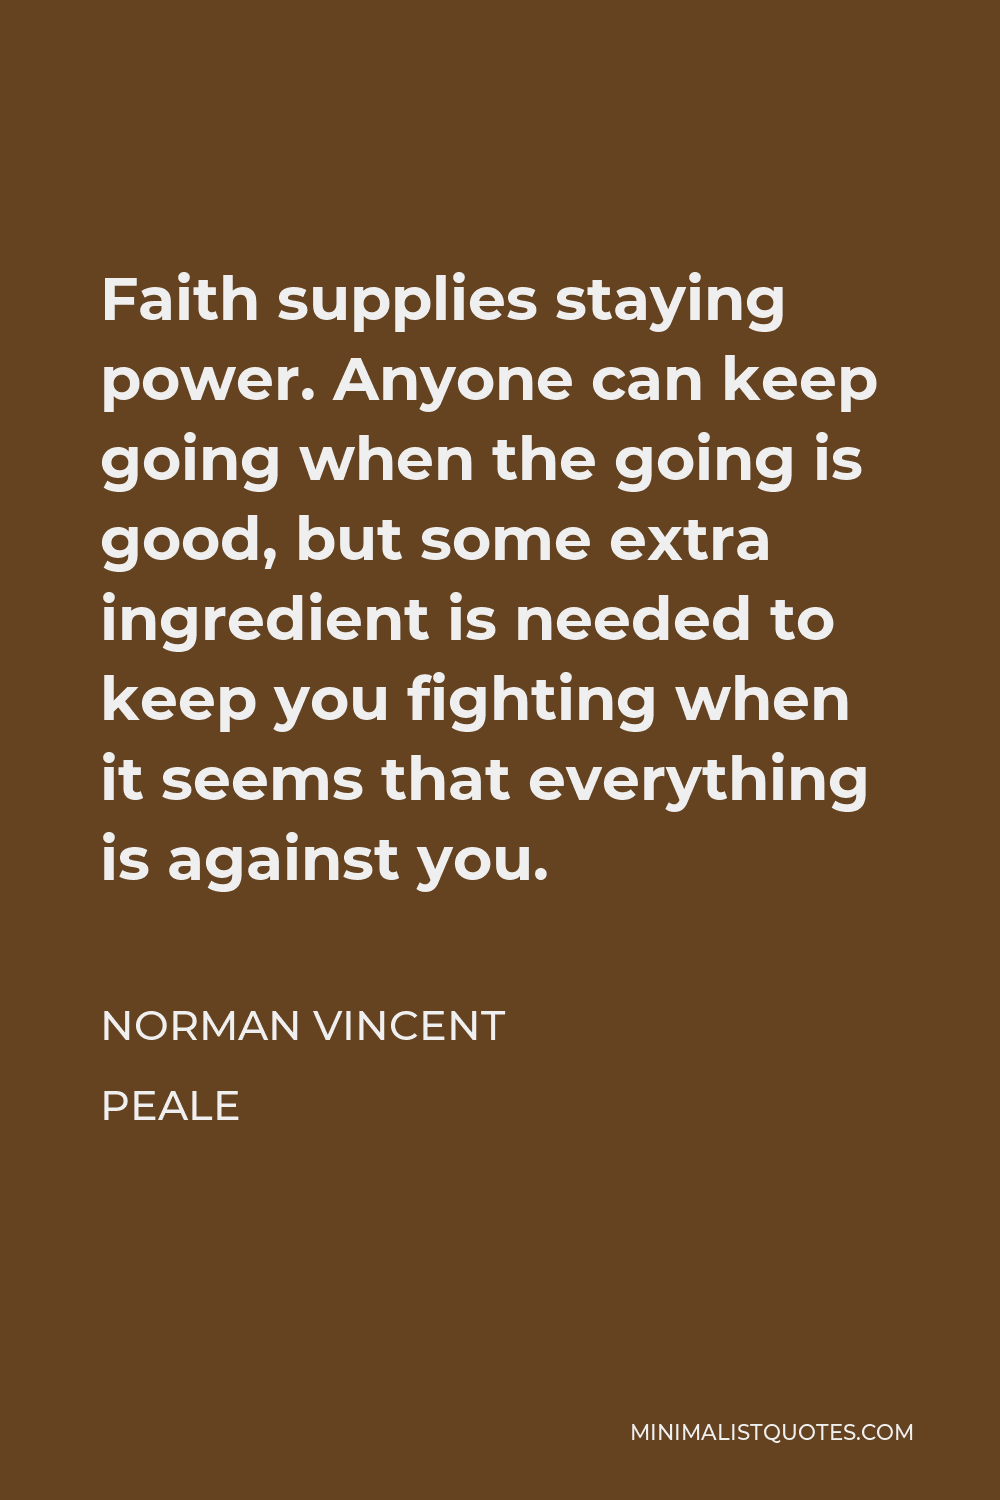 Norman Vincent Peale Quote - Faith supplies staying power. Anyone can keep going when the going is good, but some extra ingredient is needed to keep you fighting when it seems that everything is against you.